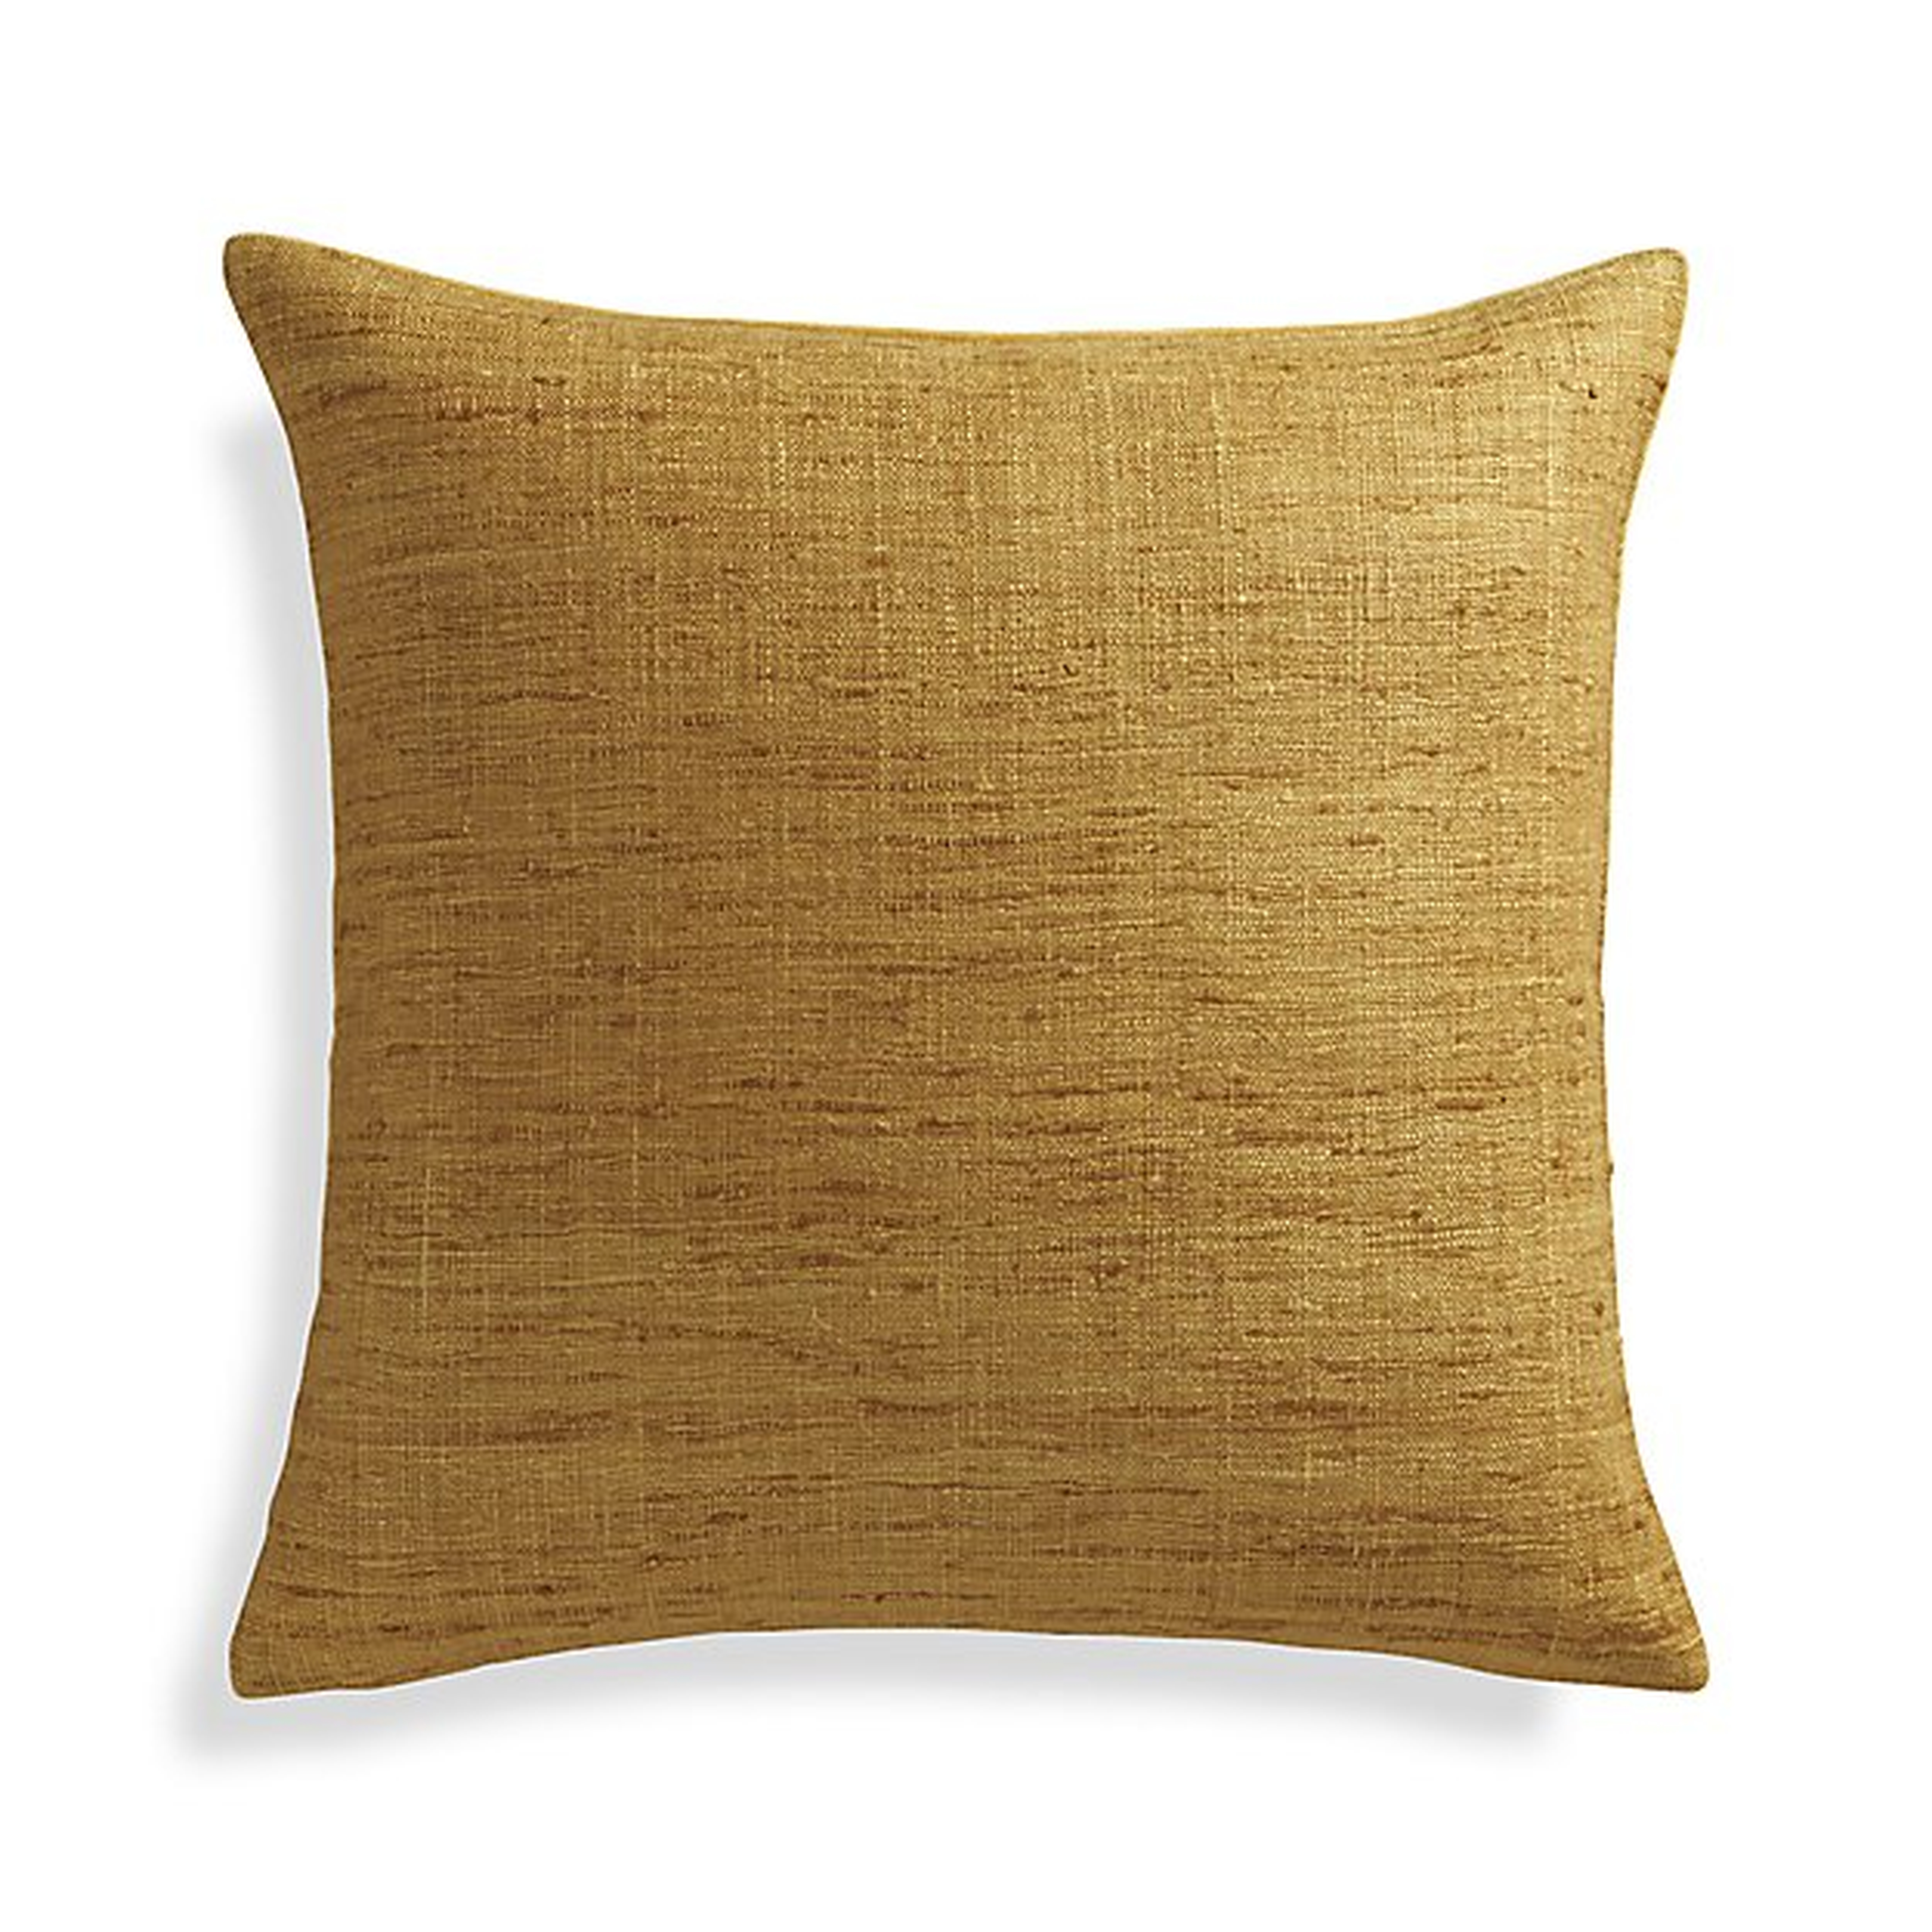 Trevino Pillow - Sunflower Yellow - 20x20 - Feather insert - Crate and Barrel